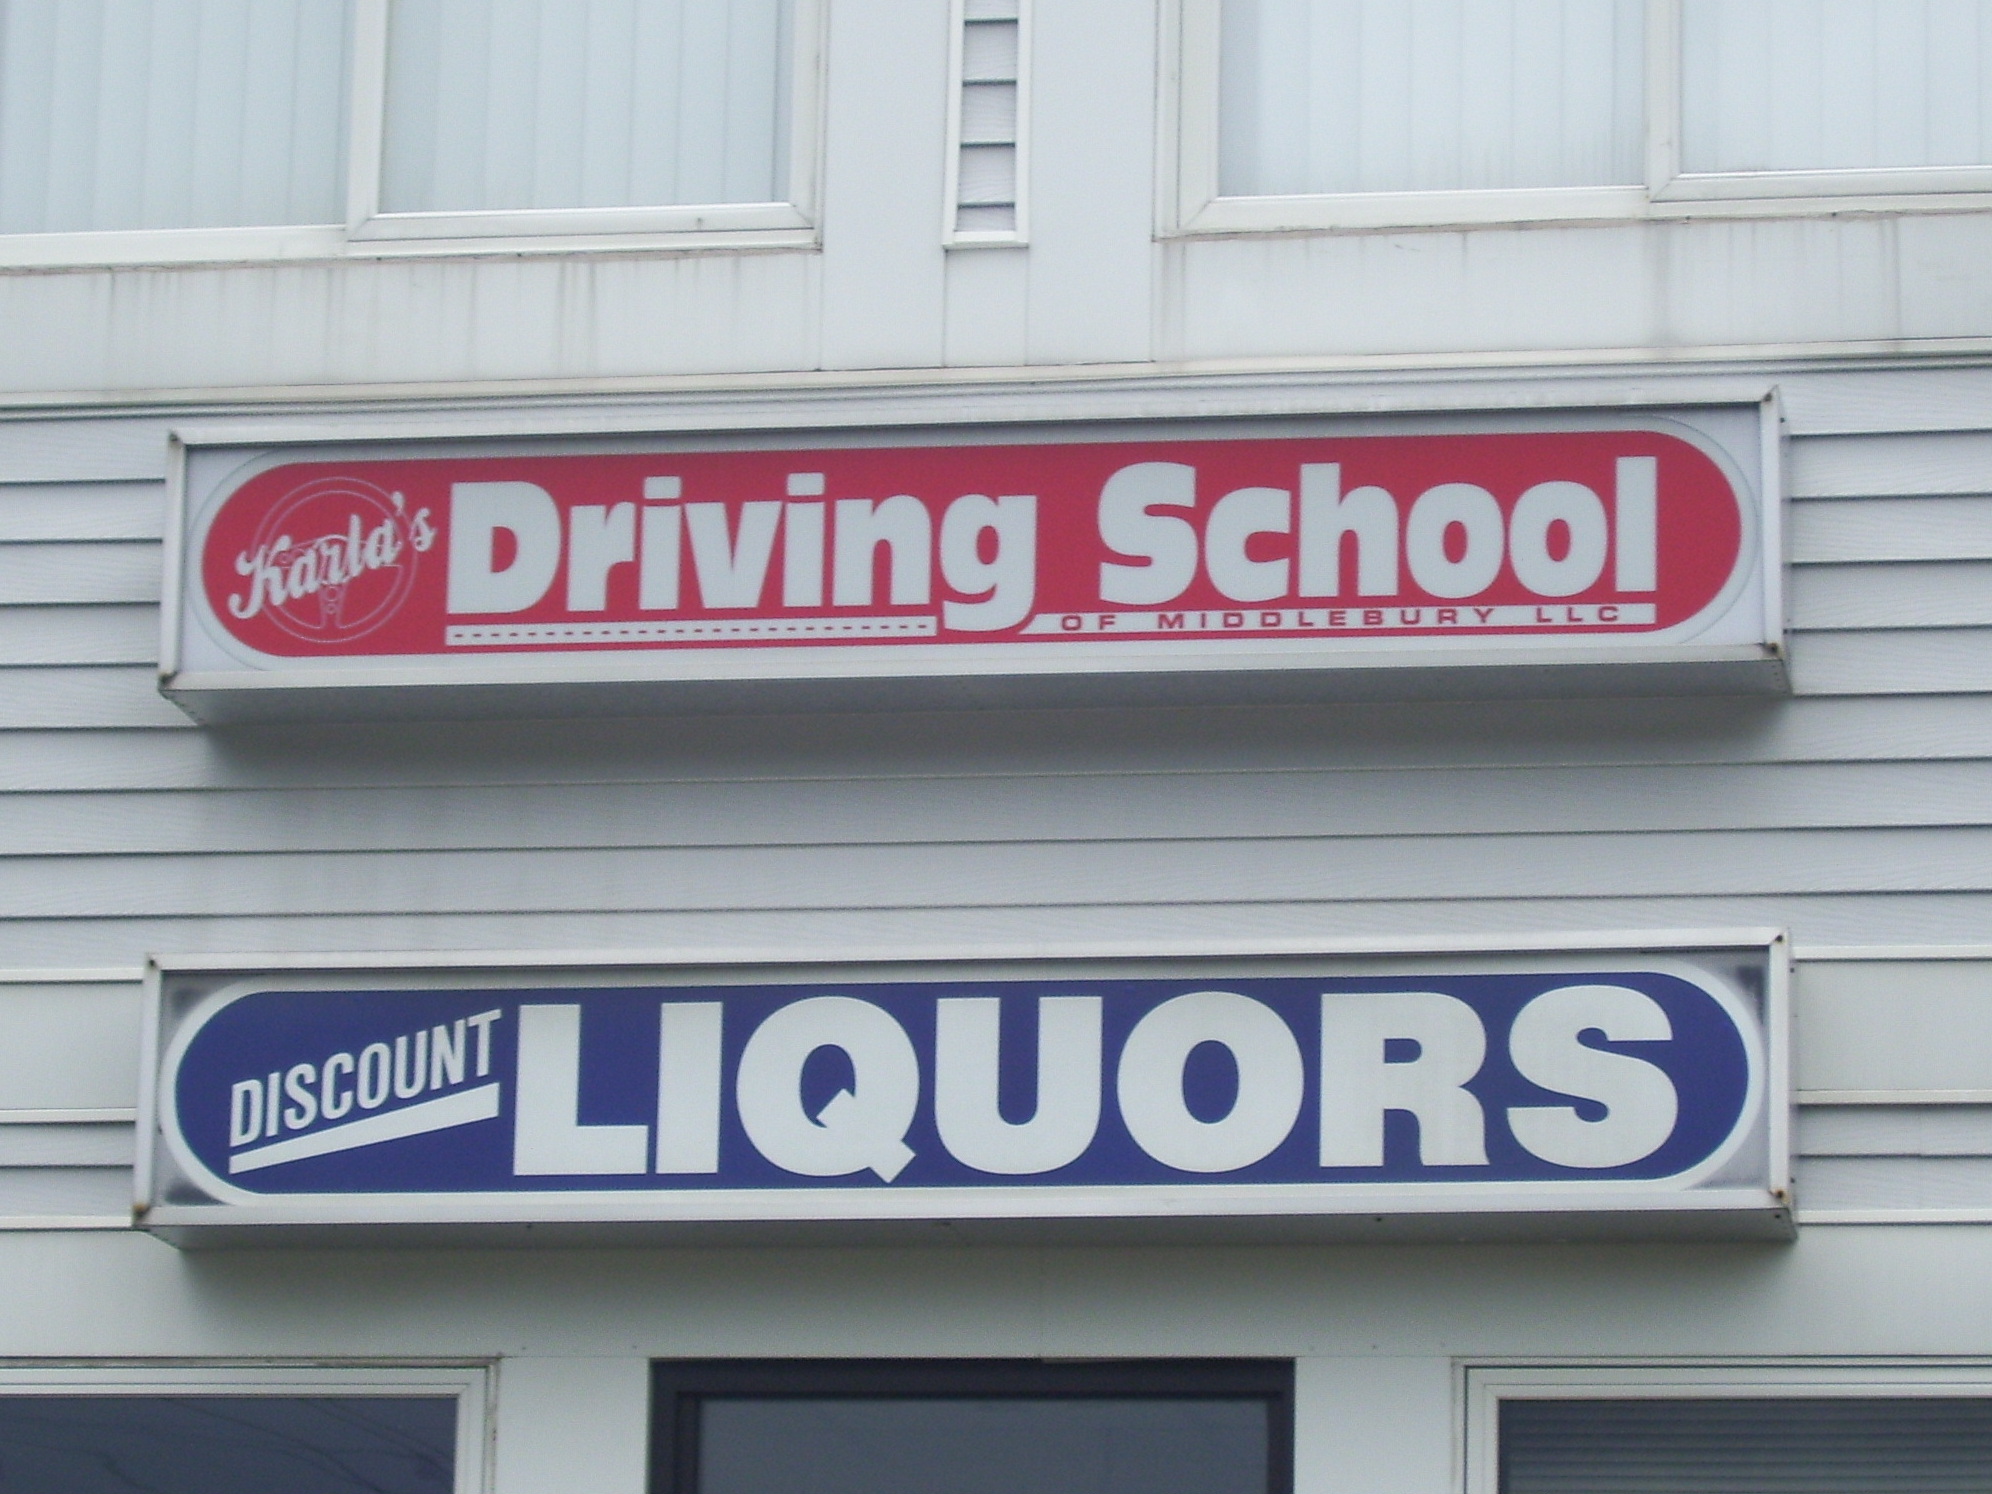 stores right next to each other, with signs above each other. Driving school and Discount liquors